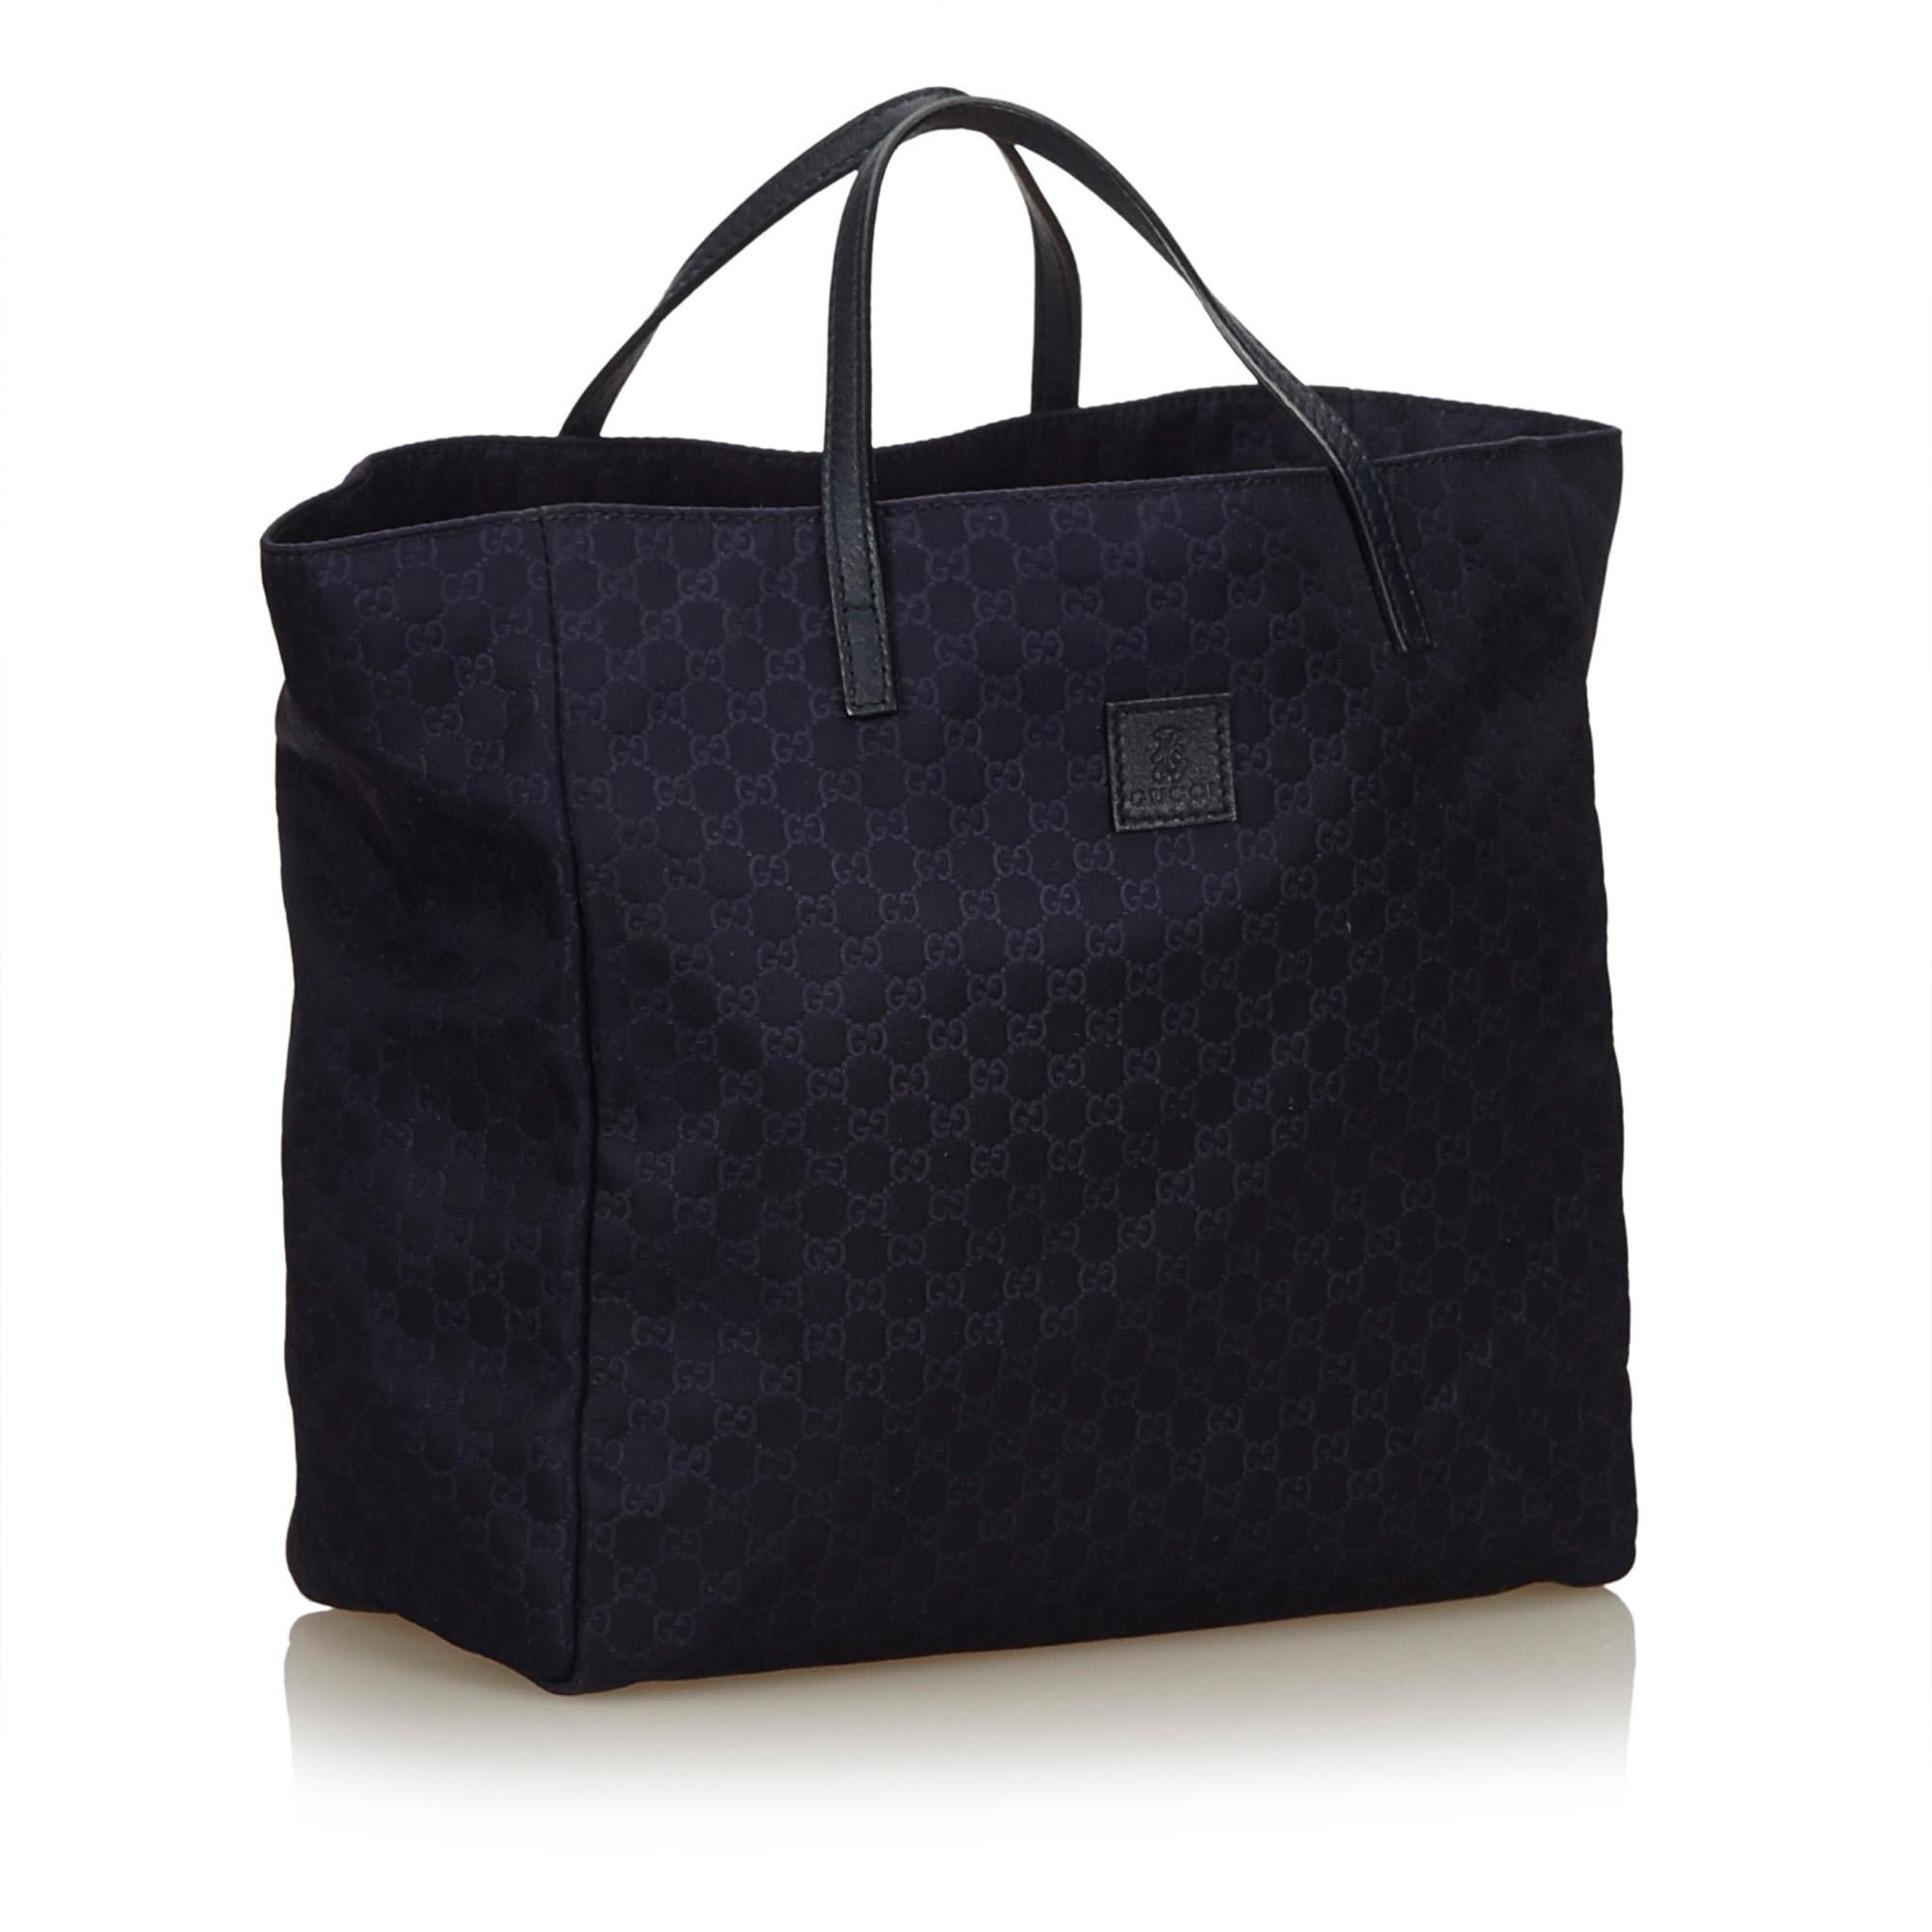 This tote bag features a nylon body, flat leather straps, open top, and interior slip pocket. It carries as B condition rating.

Inclusions: 
Dust Bag

Dimensions:
Length: 23.00 cm
Width: 22.00 cm
Depth: 11.00 cm
Hand Drop: 7.00 cm
Shoulder Drop: